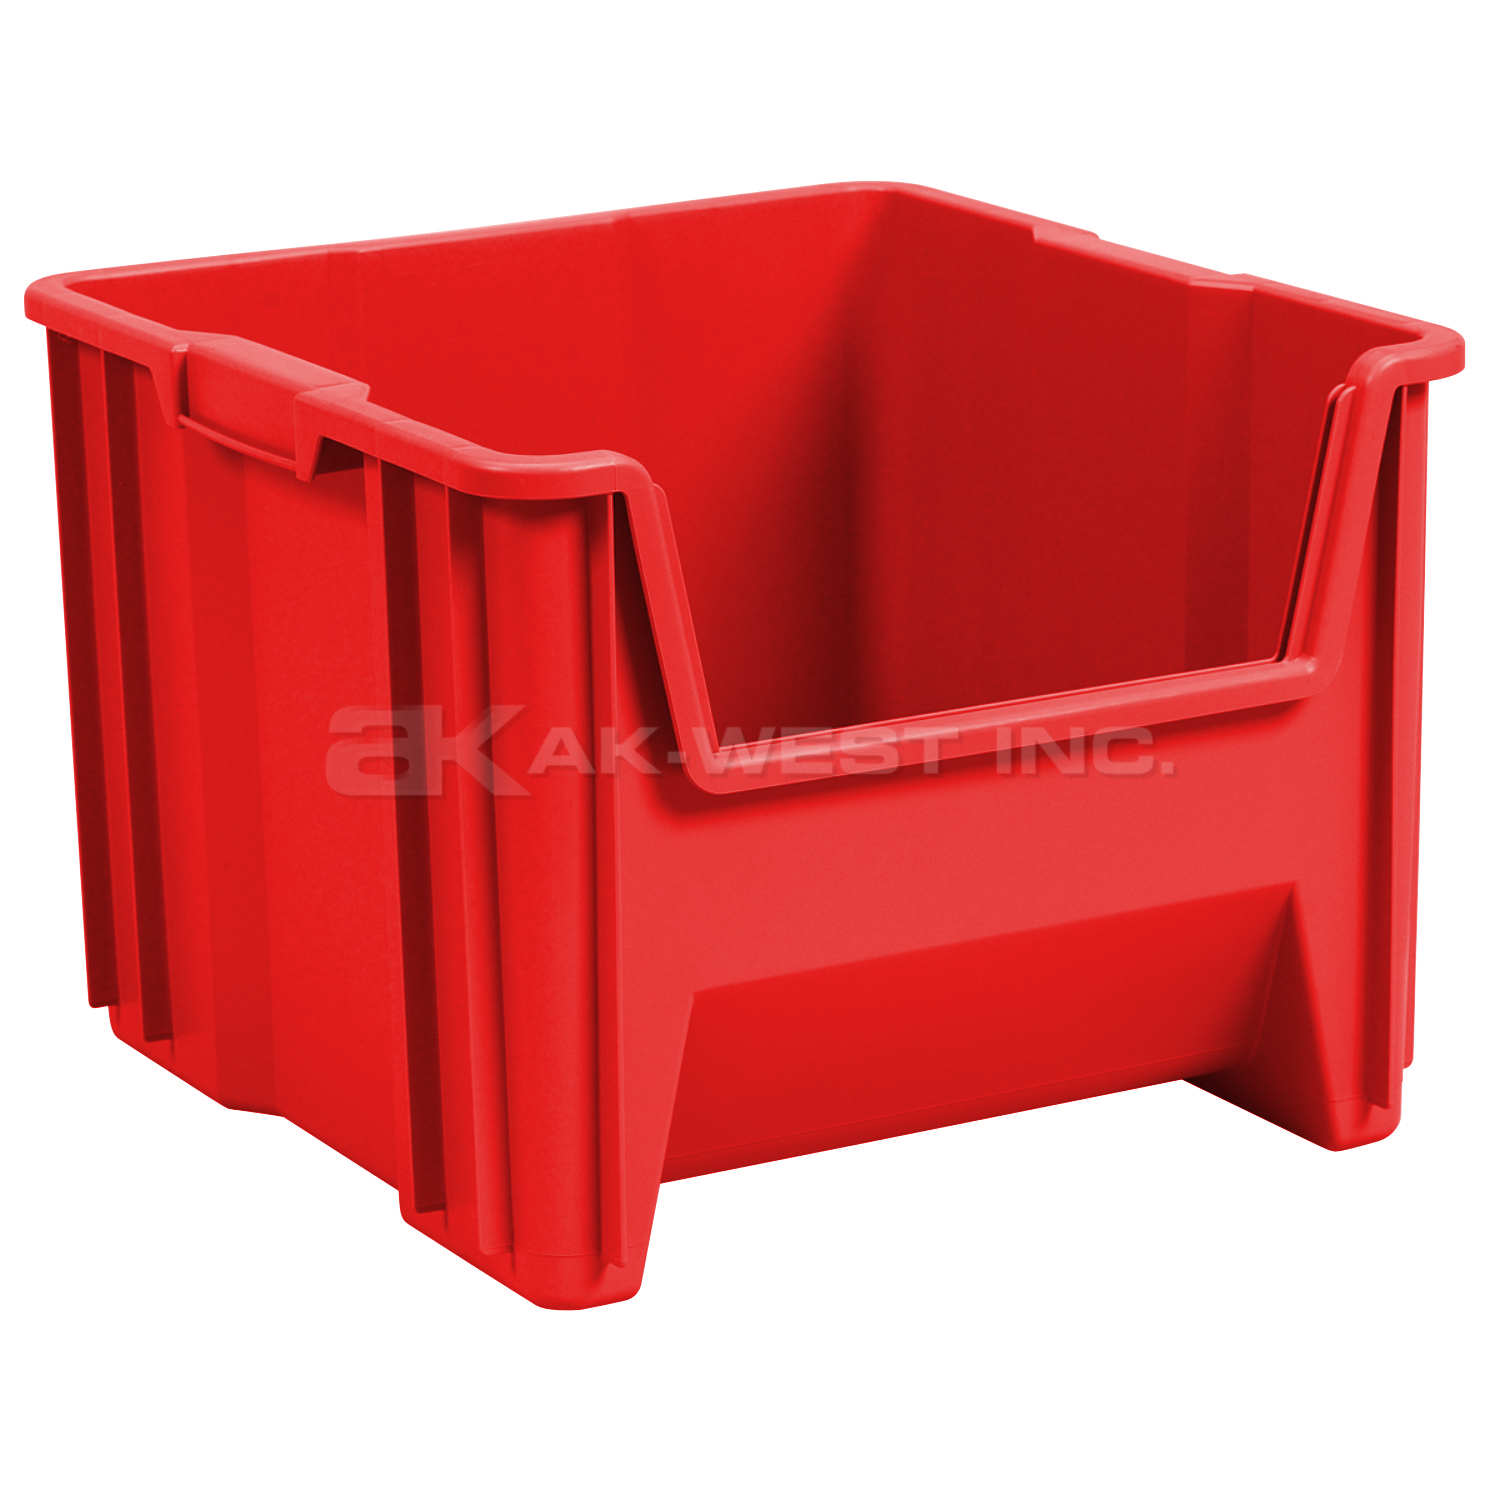 Red, 17-1/2" x 16" x 12-1/2" Stack and Store Bin (2 Per Carton)